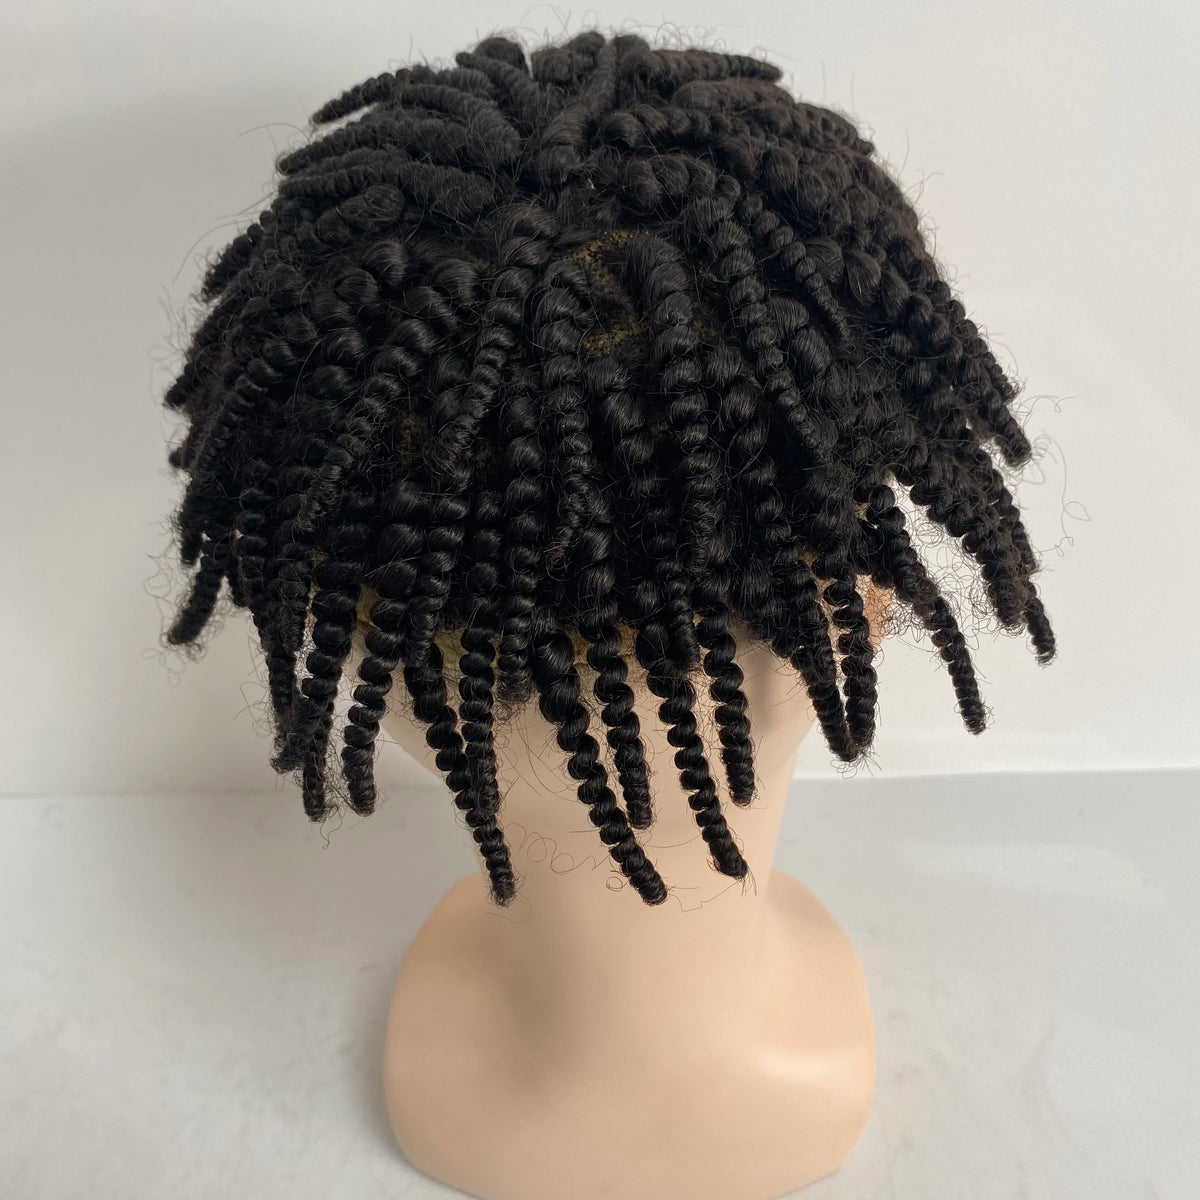 Afro Braids Australia Style Lace with PU Toupee for Black Men